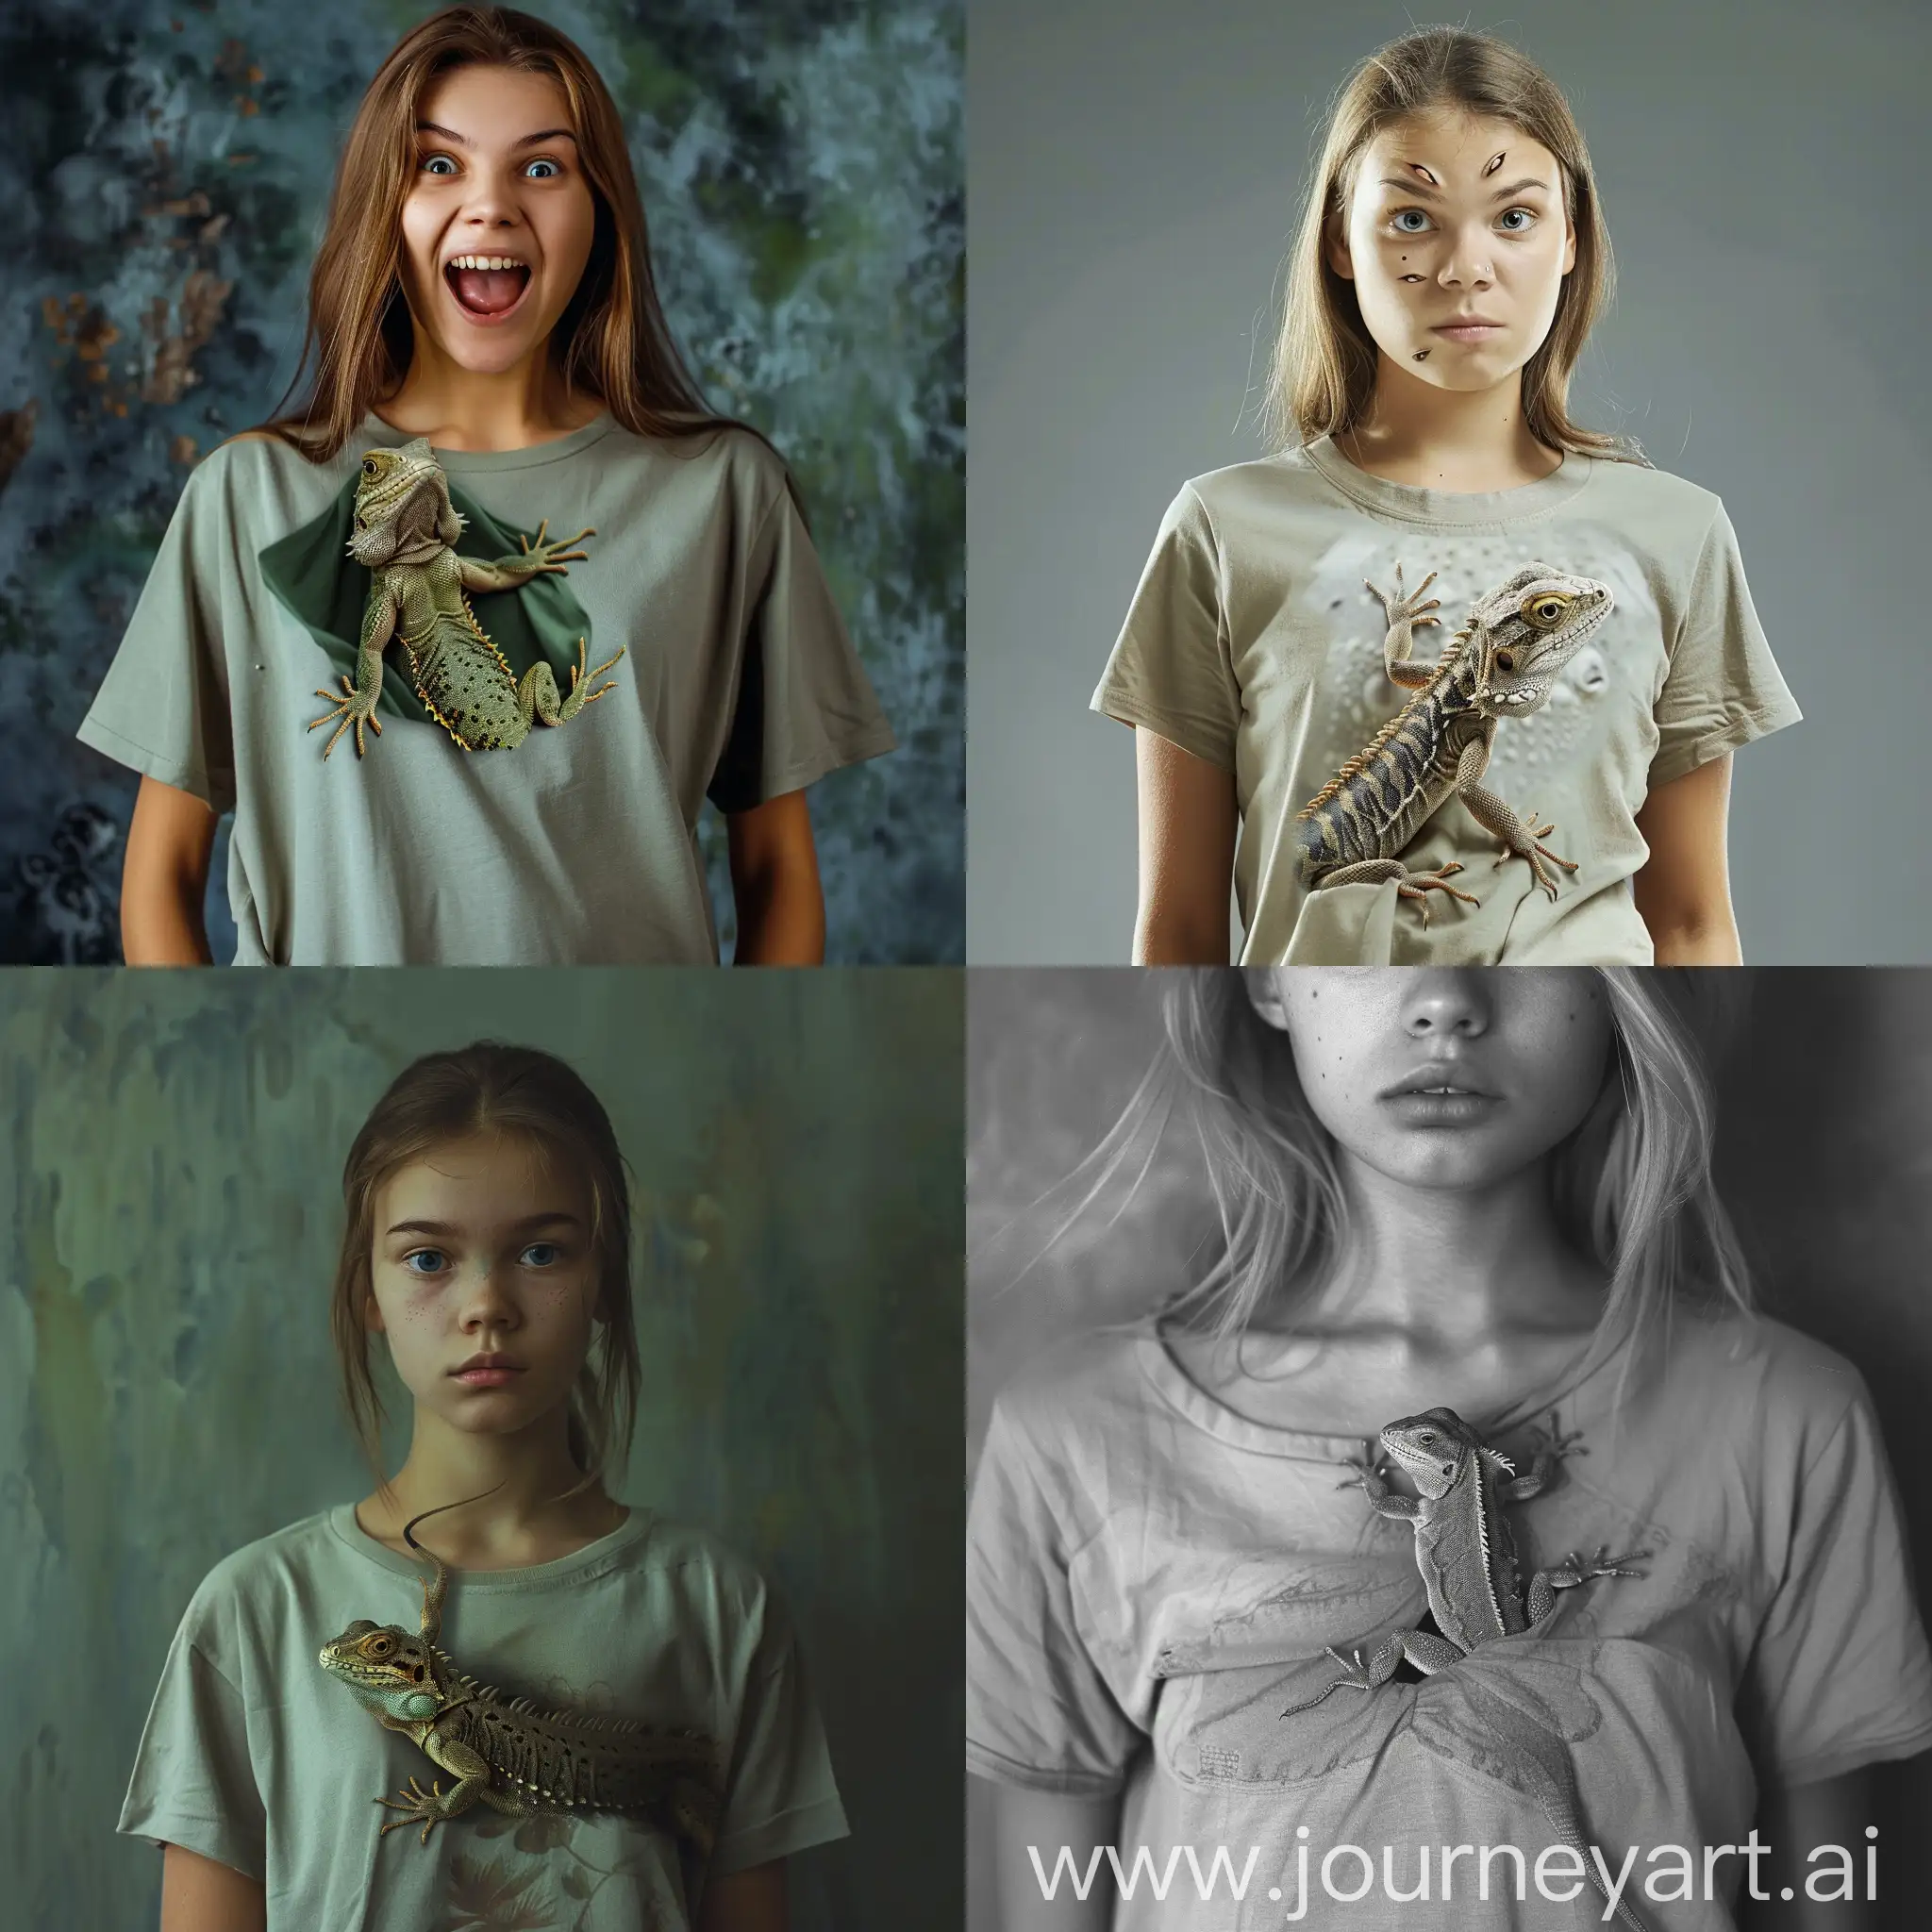 Attractive-Girl-with-Lizard-Crawling-Inside-TShirt